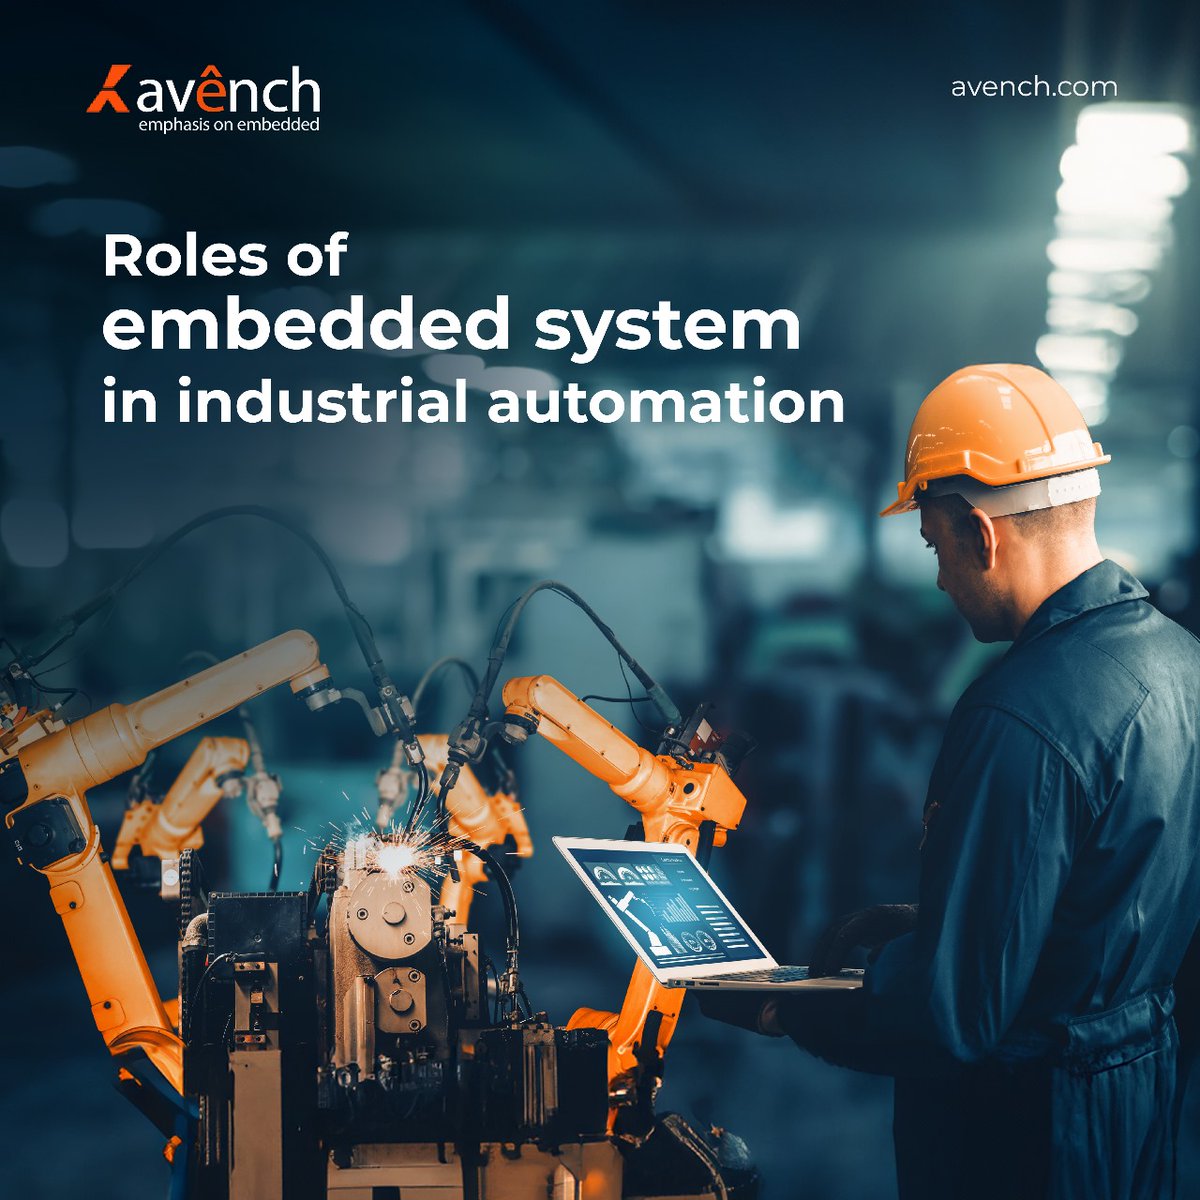 Unlock efficiency and innovation with Avench's embedded systems for industrial automation. Contact us for a free consultation today! avench.com #avenchsystem #embeddedsystems #IOTsystem #microcontrollers #TechVision #hardwaretools #embedded_system #IoTSecurity